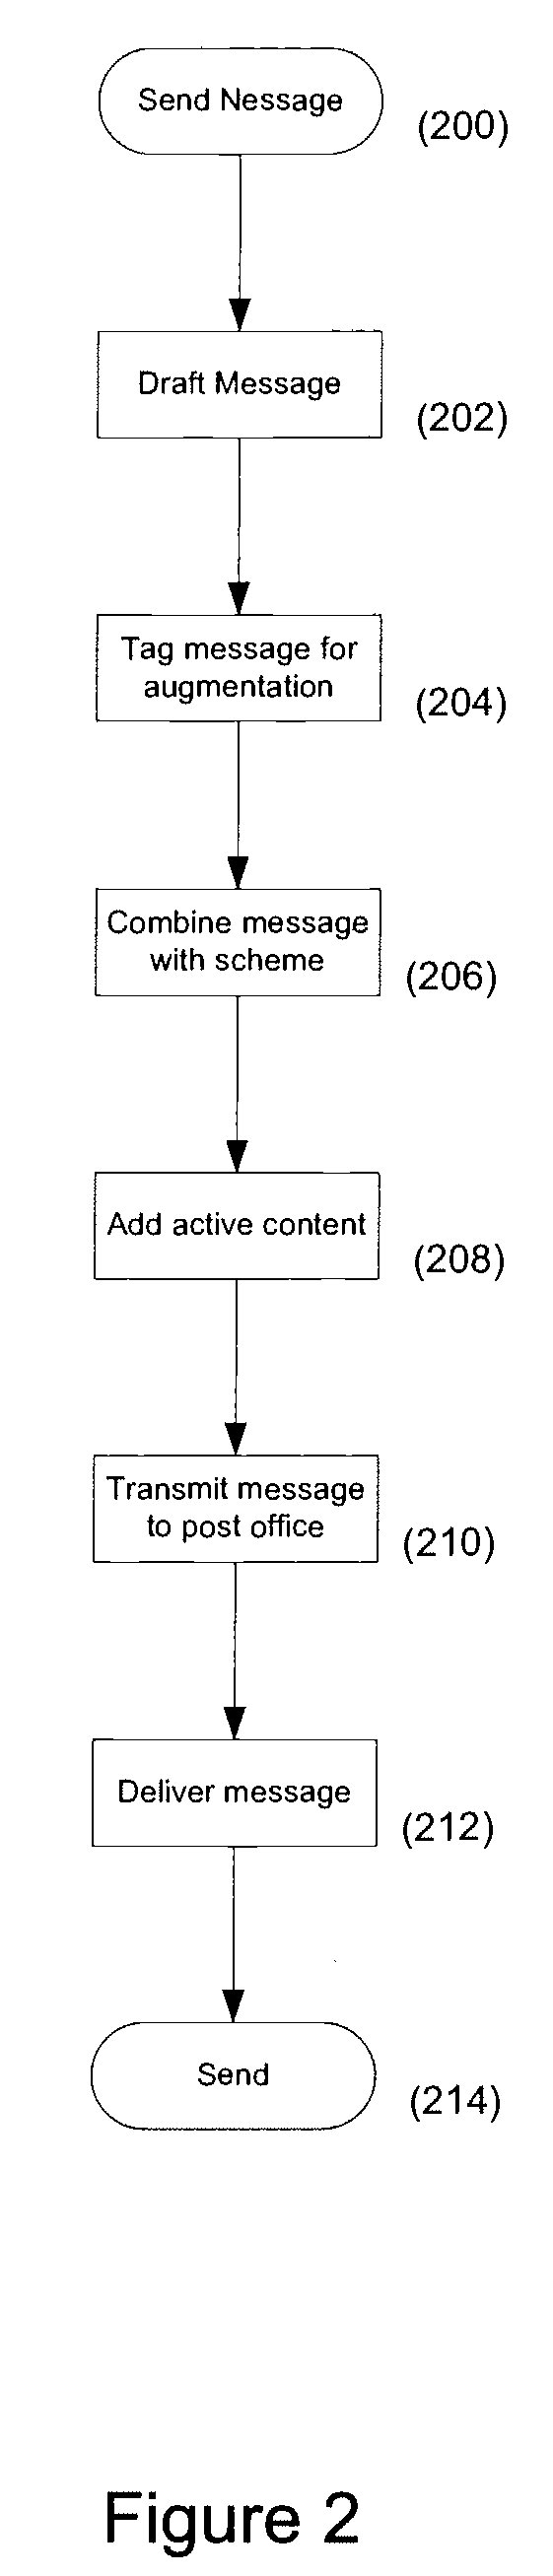 Email templates for person to person communications